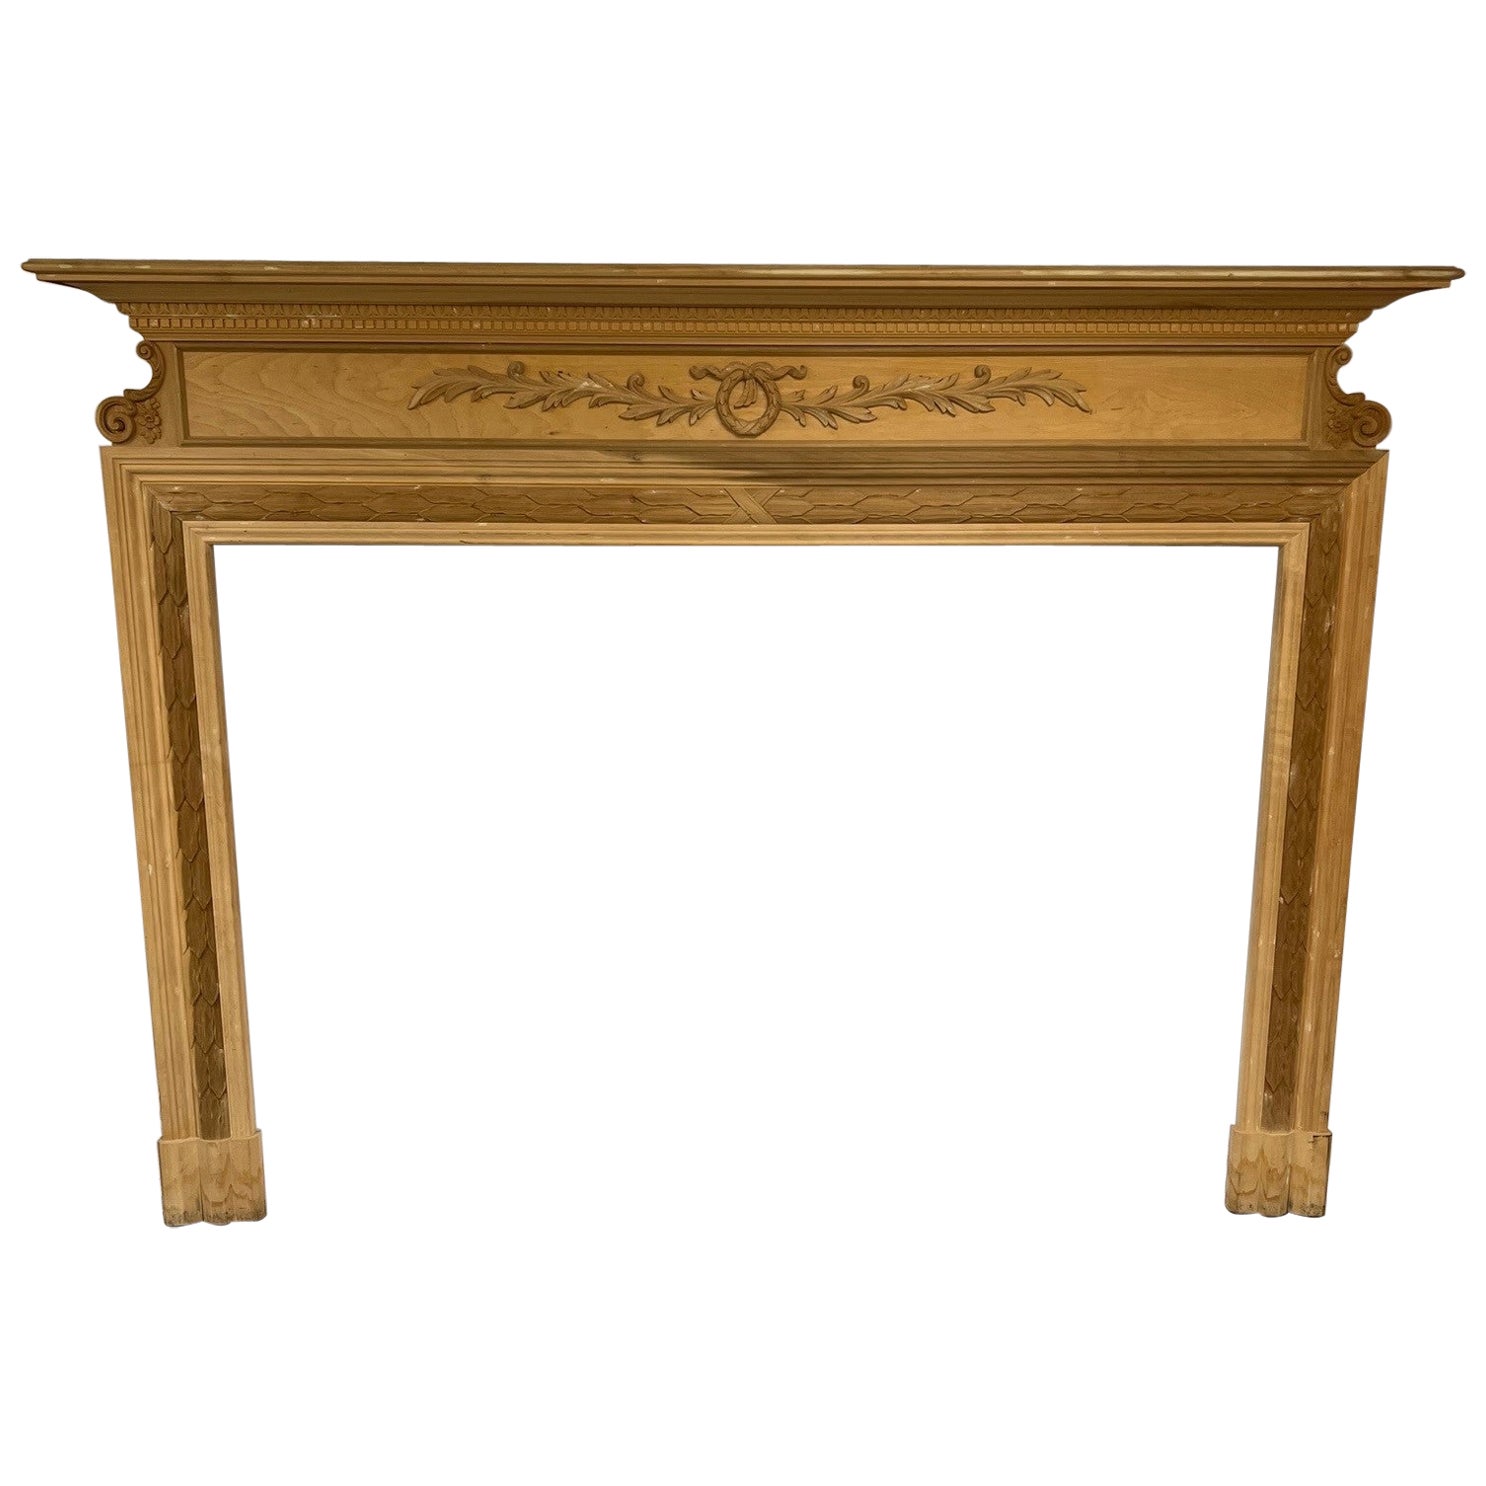 Reproduction Wood Fireplace Mantel with Carved Wood Wreath Center Large Opening For Sale